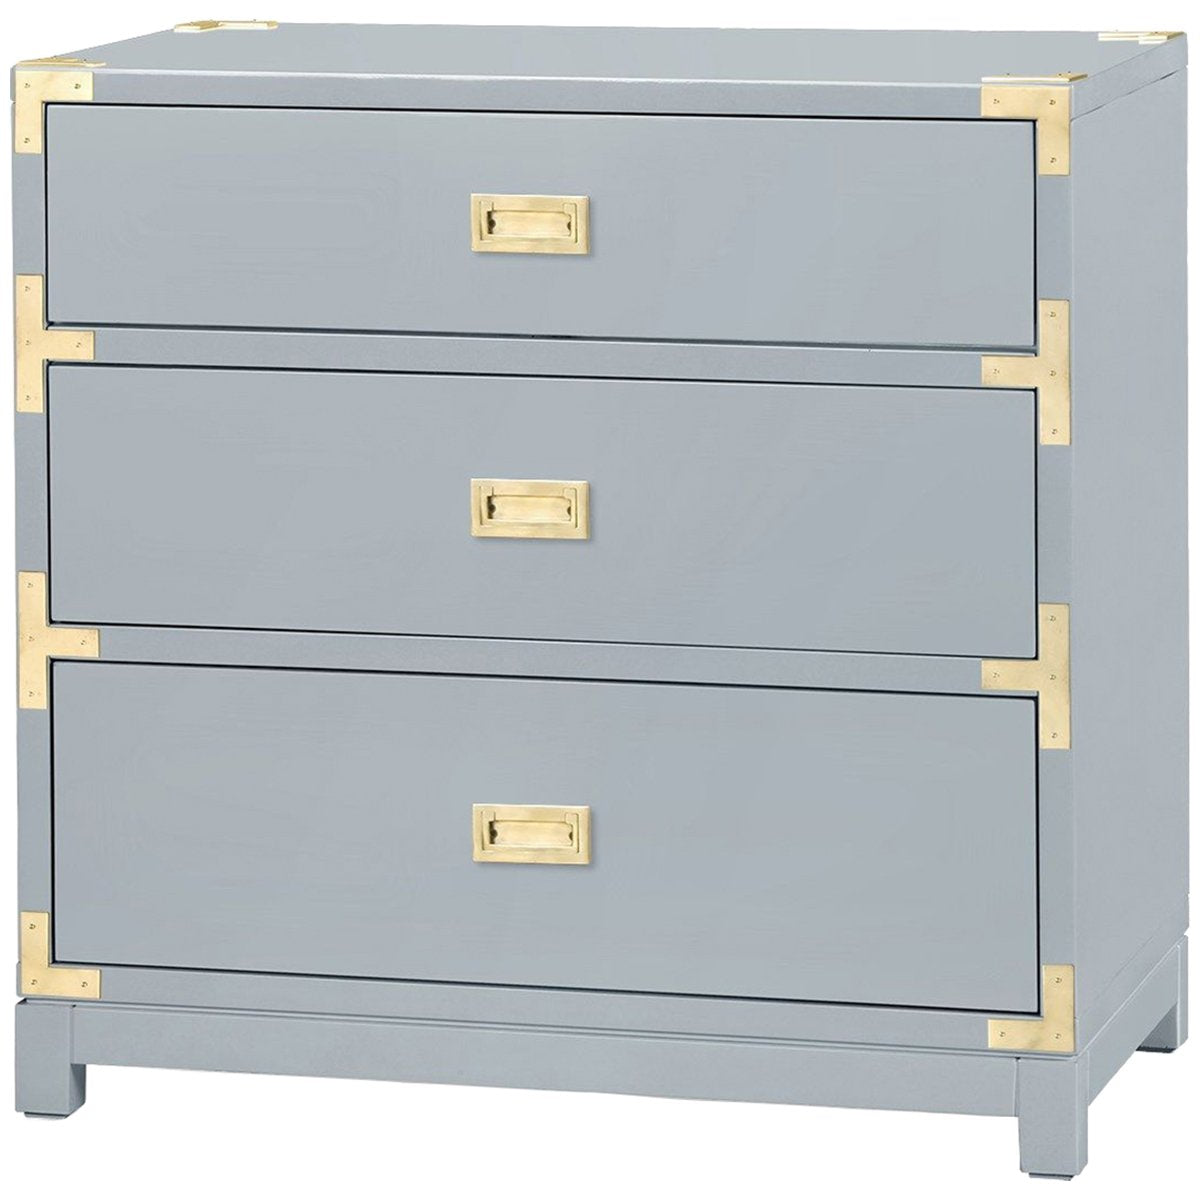 Villa & House Victoria 3-Drawer Side Table - Gray